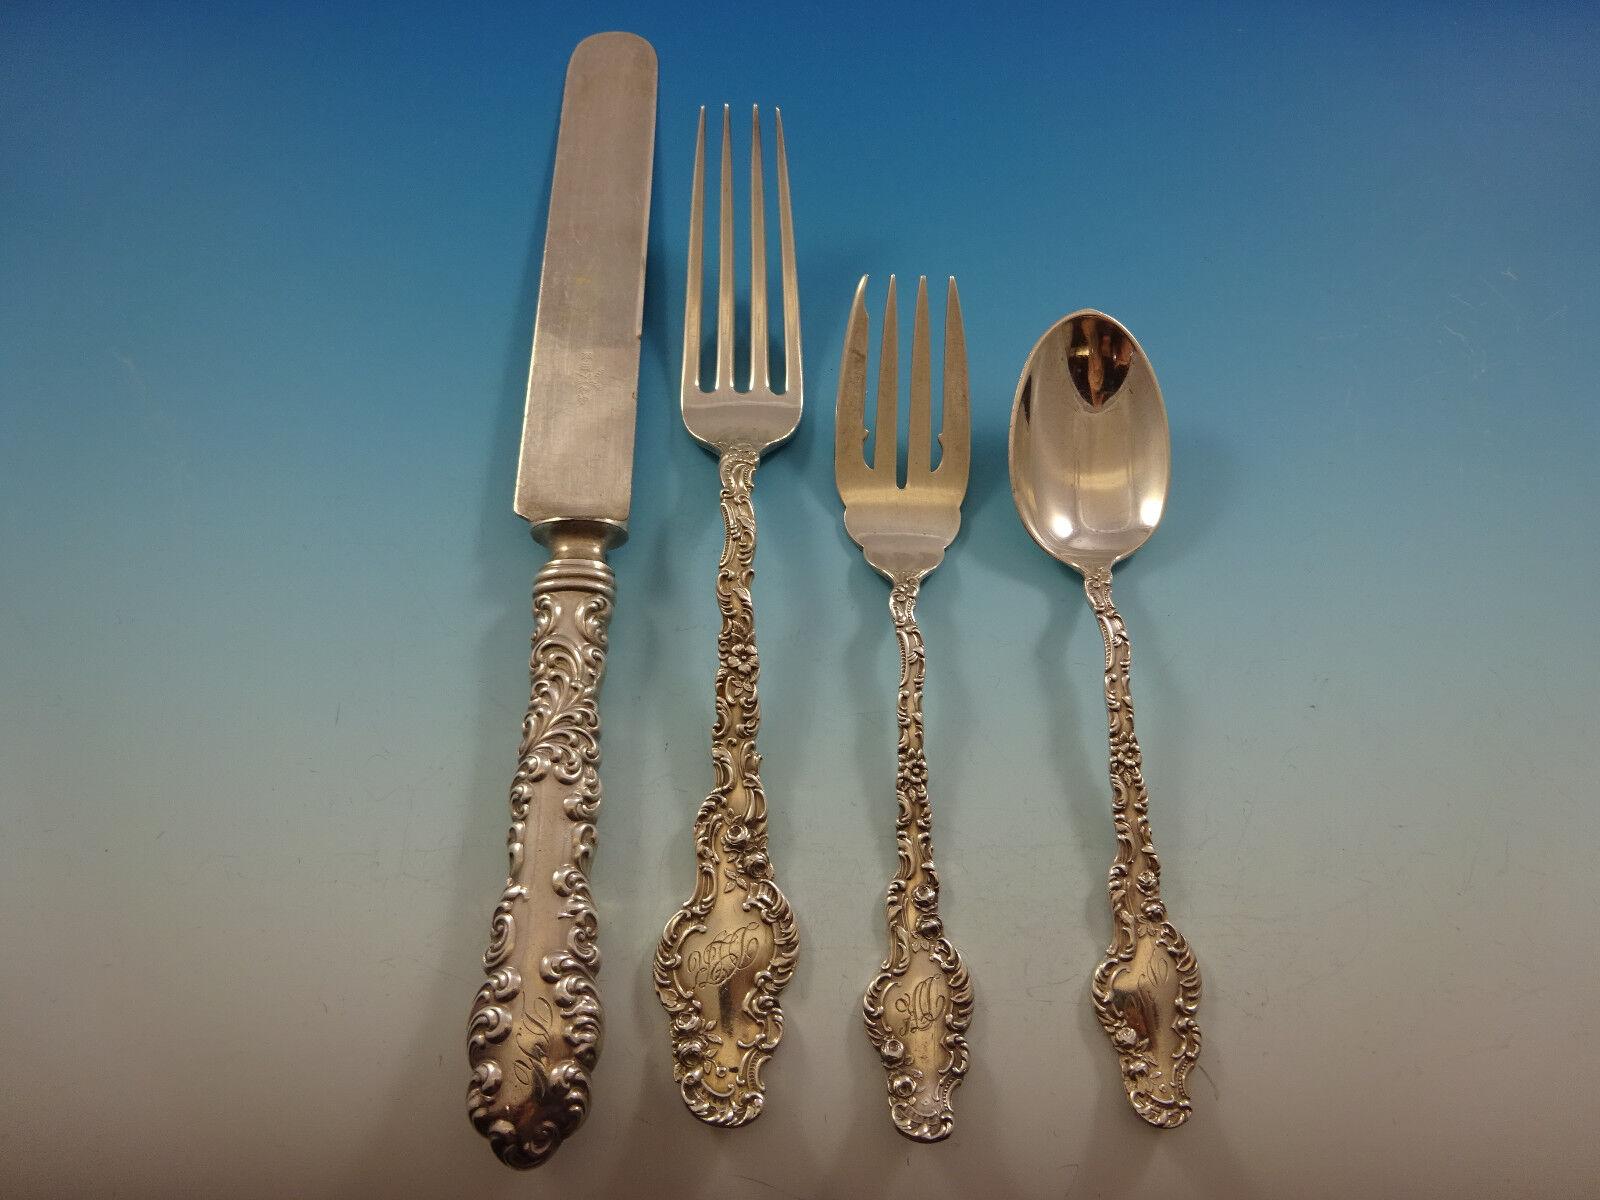 Watteau by Durgin Sterling Silver Dinner Size Flatware set - 74 pieces. This set includes:

12 Dinner Knives, blunt silverplated blades, 9 5/8